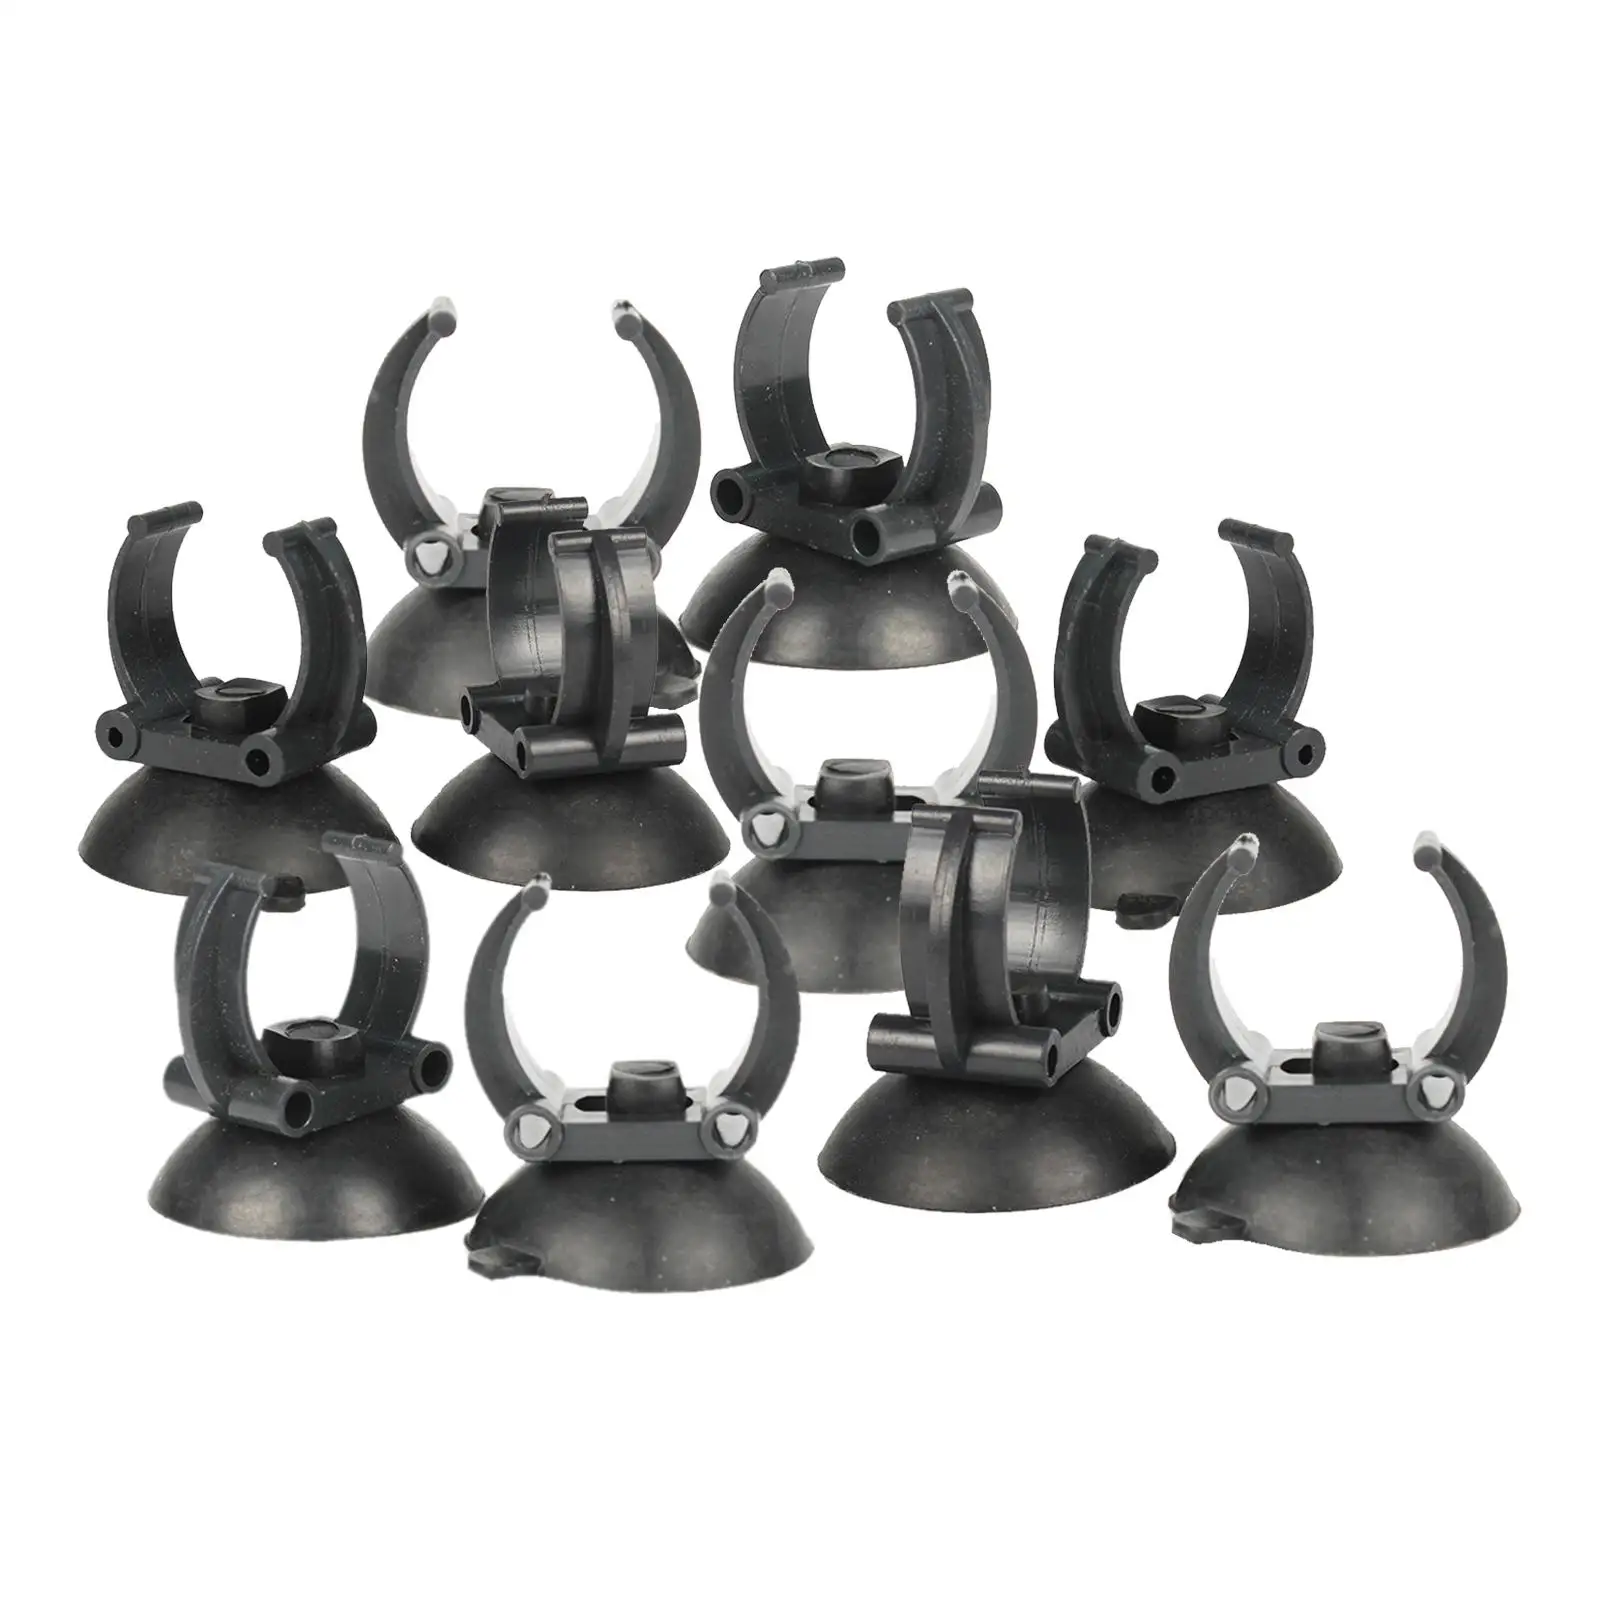 10 Pieces Aquarium Heater Suction Cups Fixing Clip Heating Rod Holders Clamps 35mm Diameter for Fish Tank Accessories